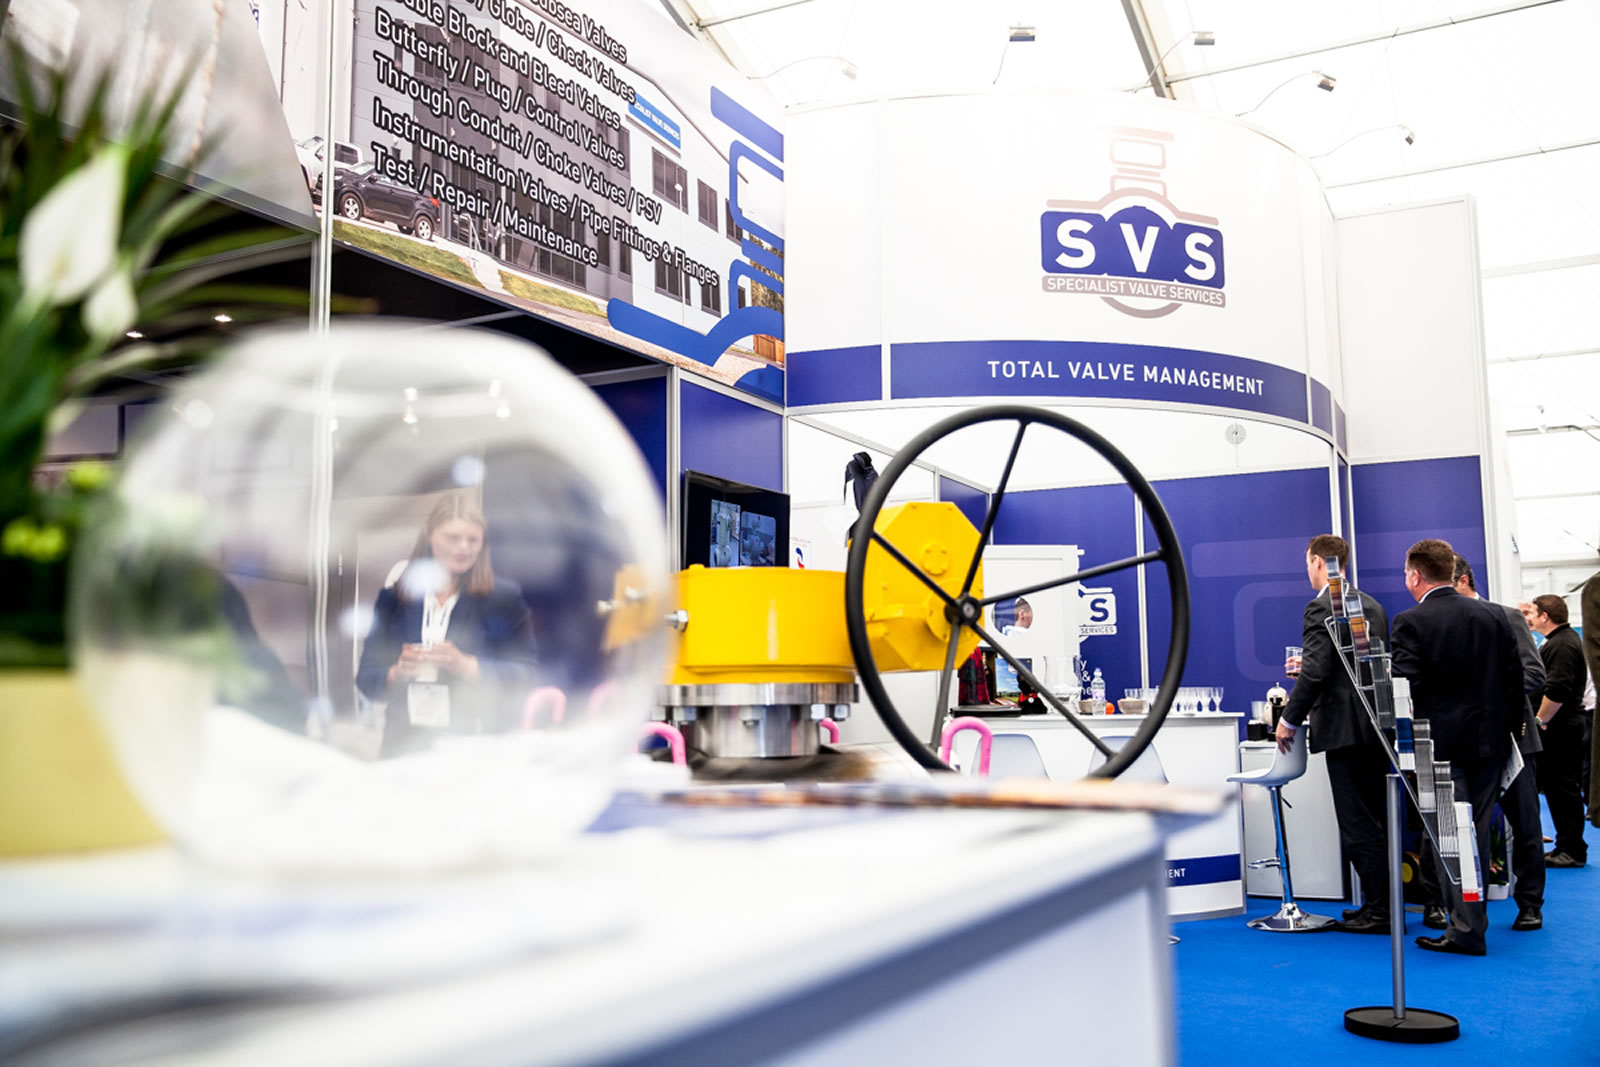 SVS Exhibit at Offshore Europe 2015-image-6